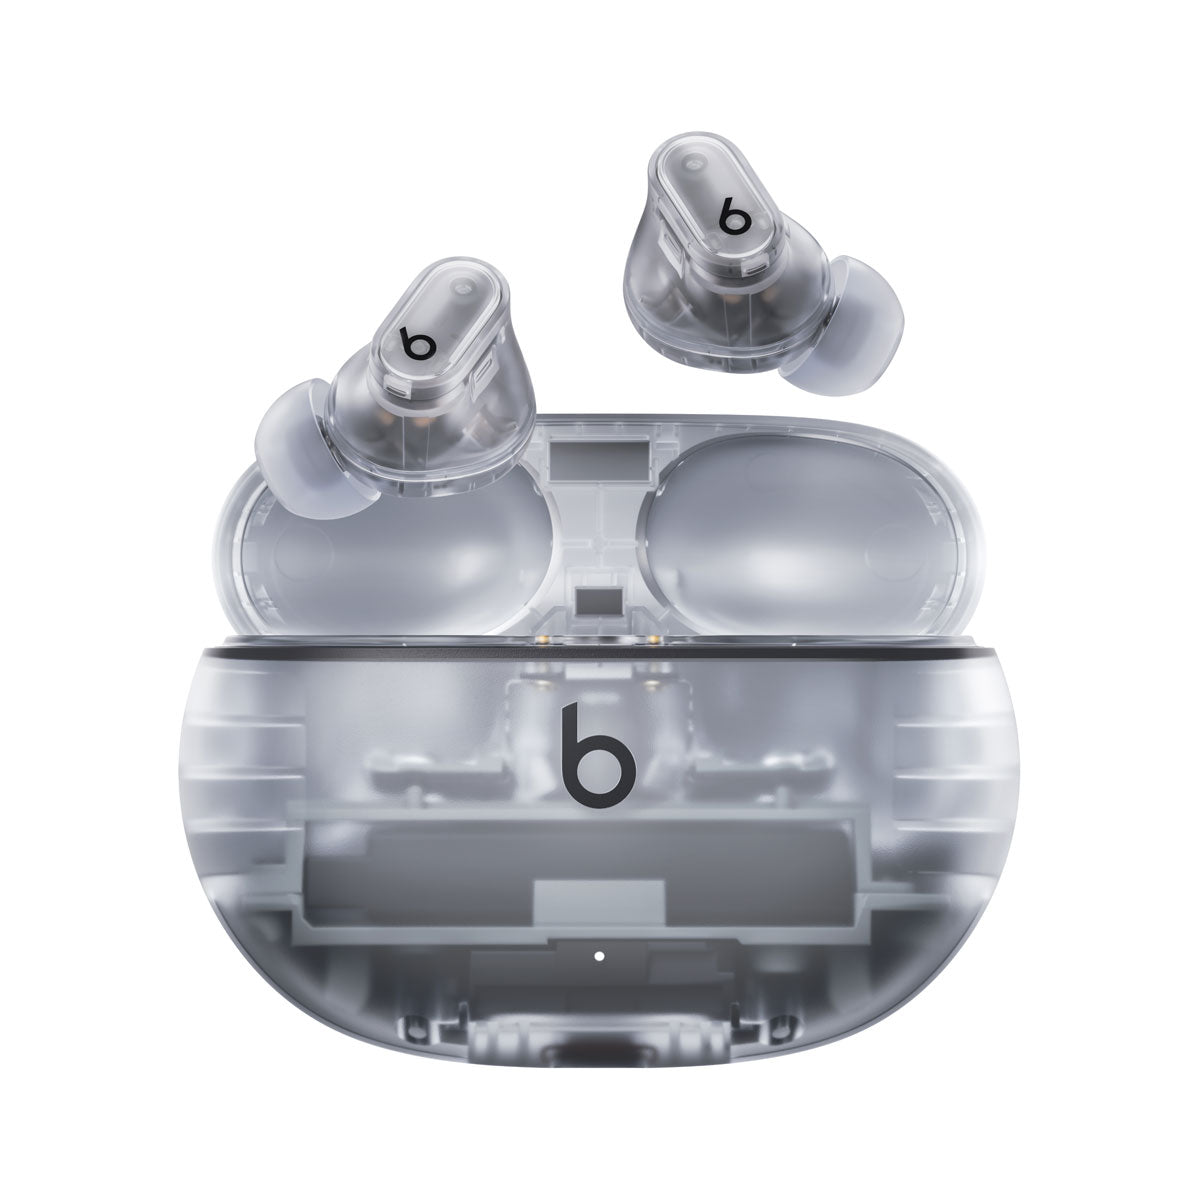 Beats Studio Buds Plus True Wireless Noise Cancelling Earbuds Enhanced Apple & Android Compatibility Built-in Microphone